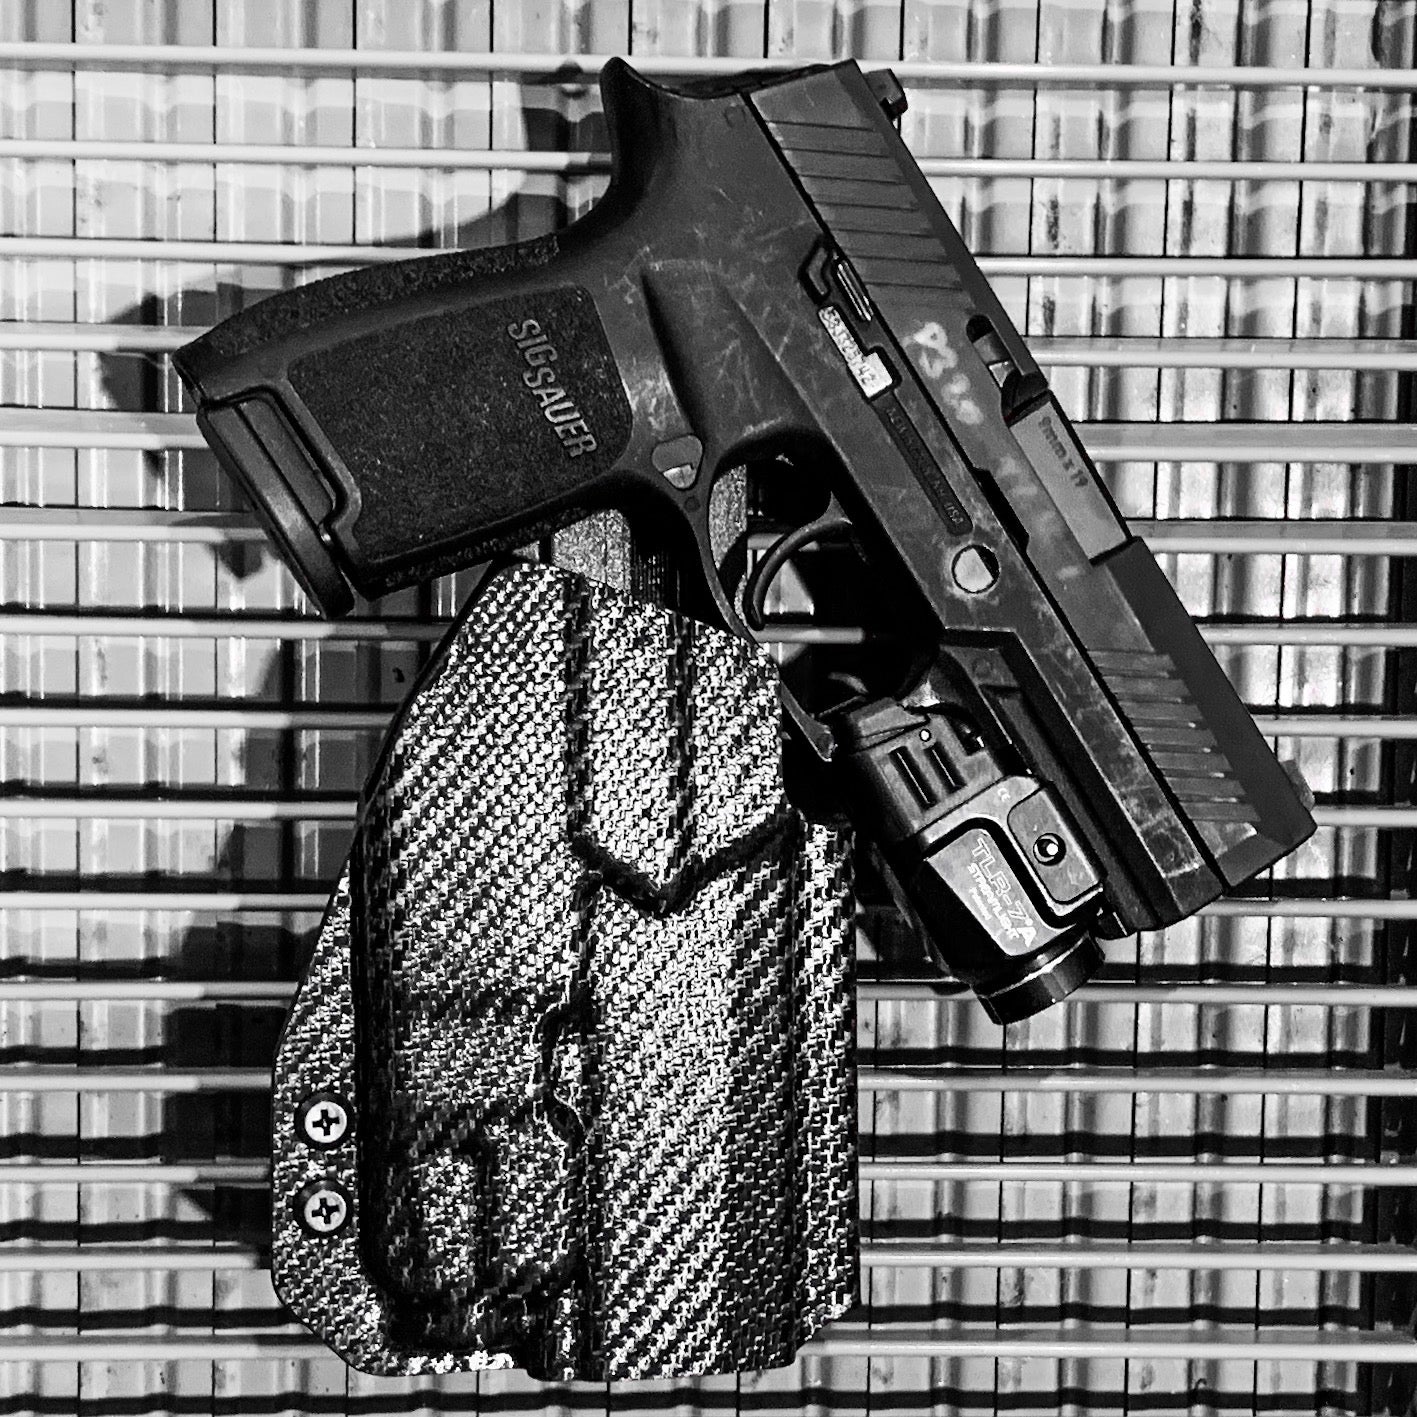 Outside Waistband Holster designed to fit the Sig Sauer P320 Compact, Carry and M18 pistols with the Streamlight TLR-7 or TLR-7A light and GoGuns USA Gas Pedal mounted to the pistol. Holster retention is on the light itself and not the pistol, the holster will not work without the light mounted on the firearm.